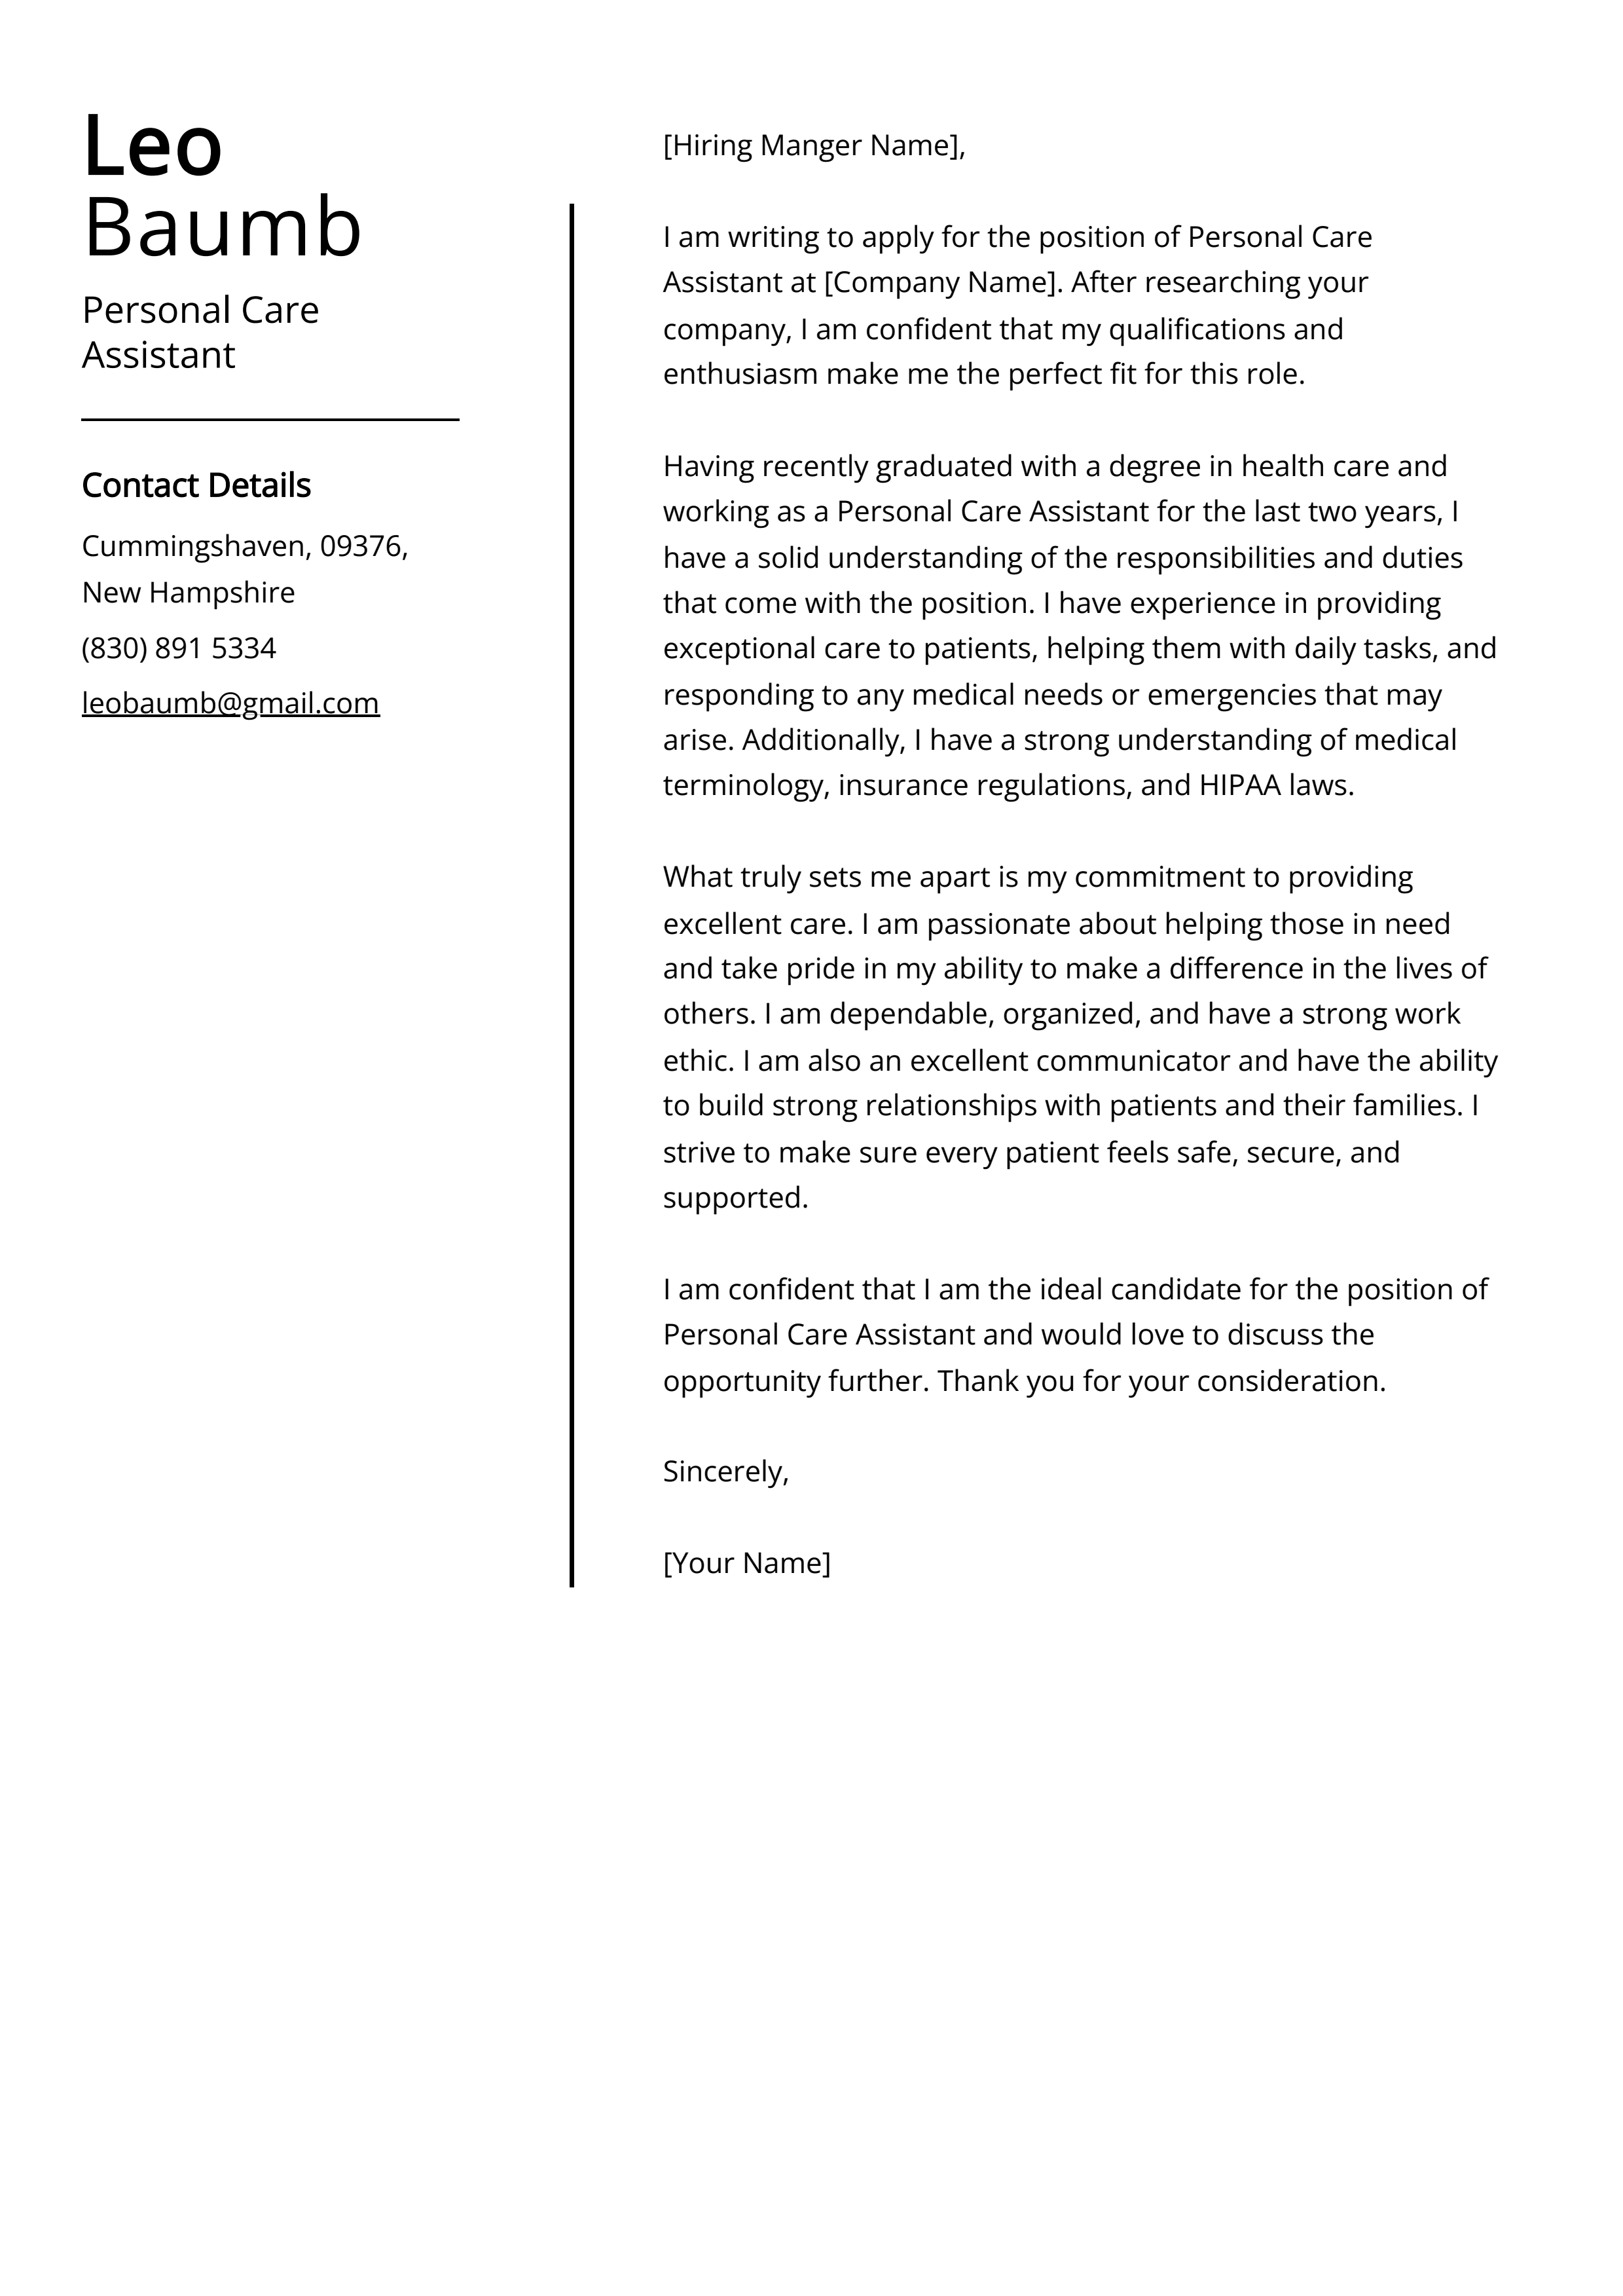 Personal Care Assistant Cover Letter Example